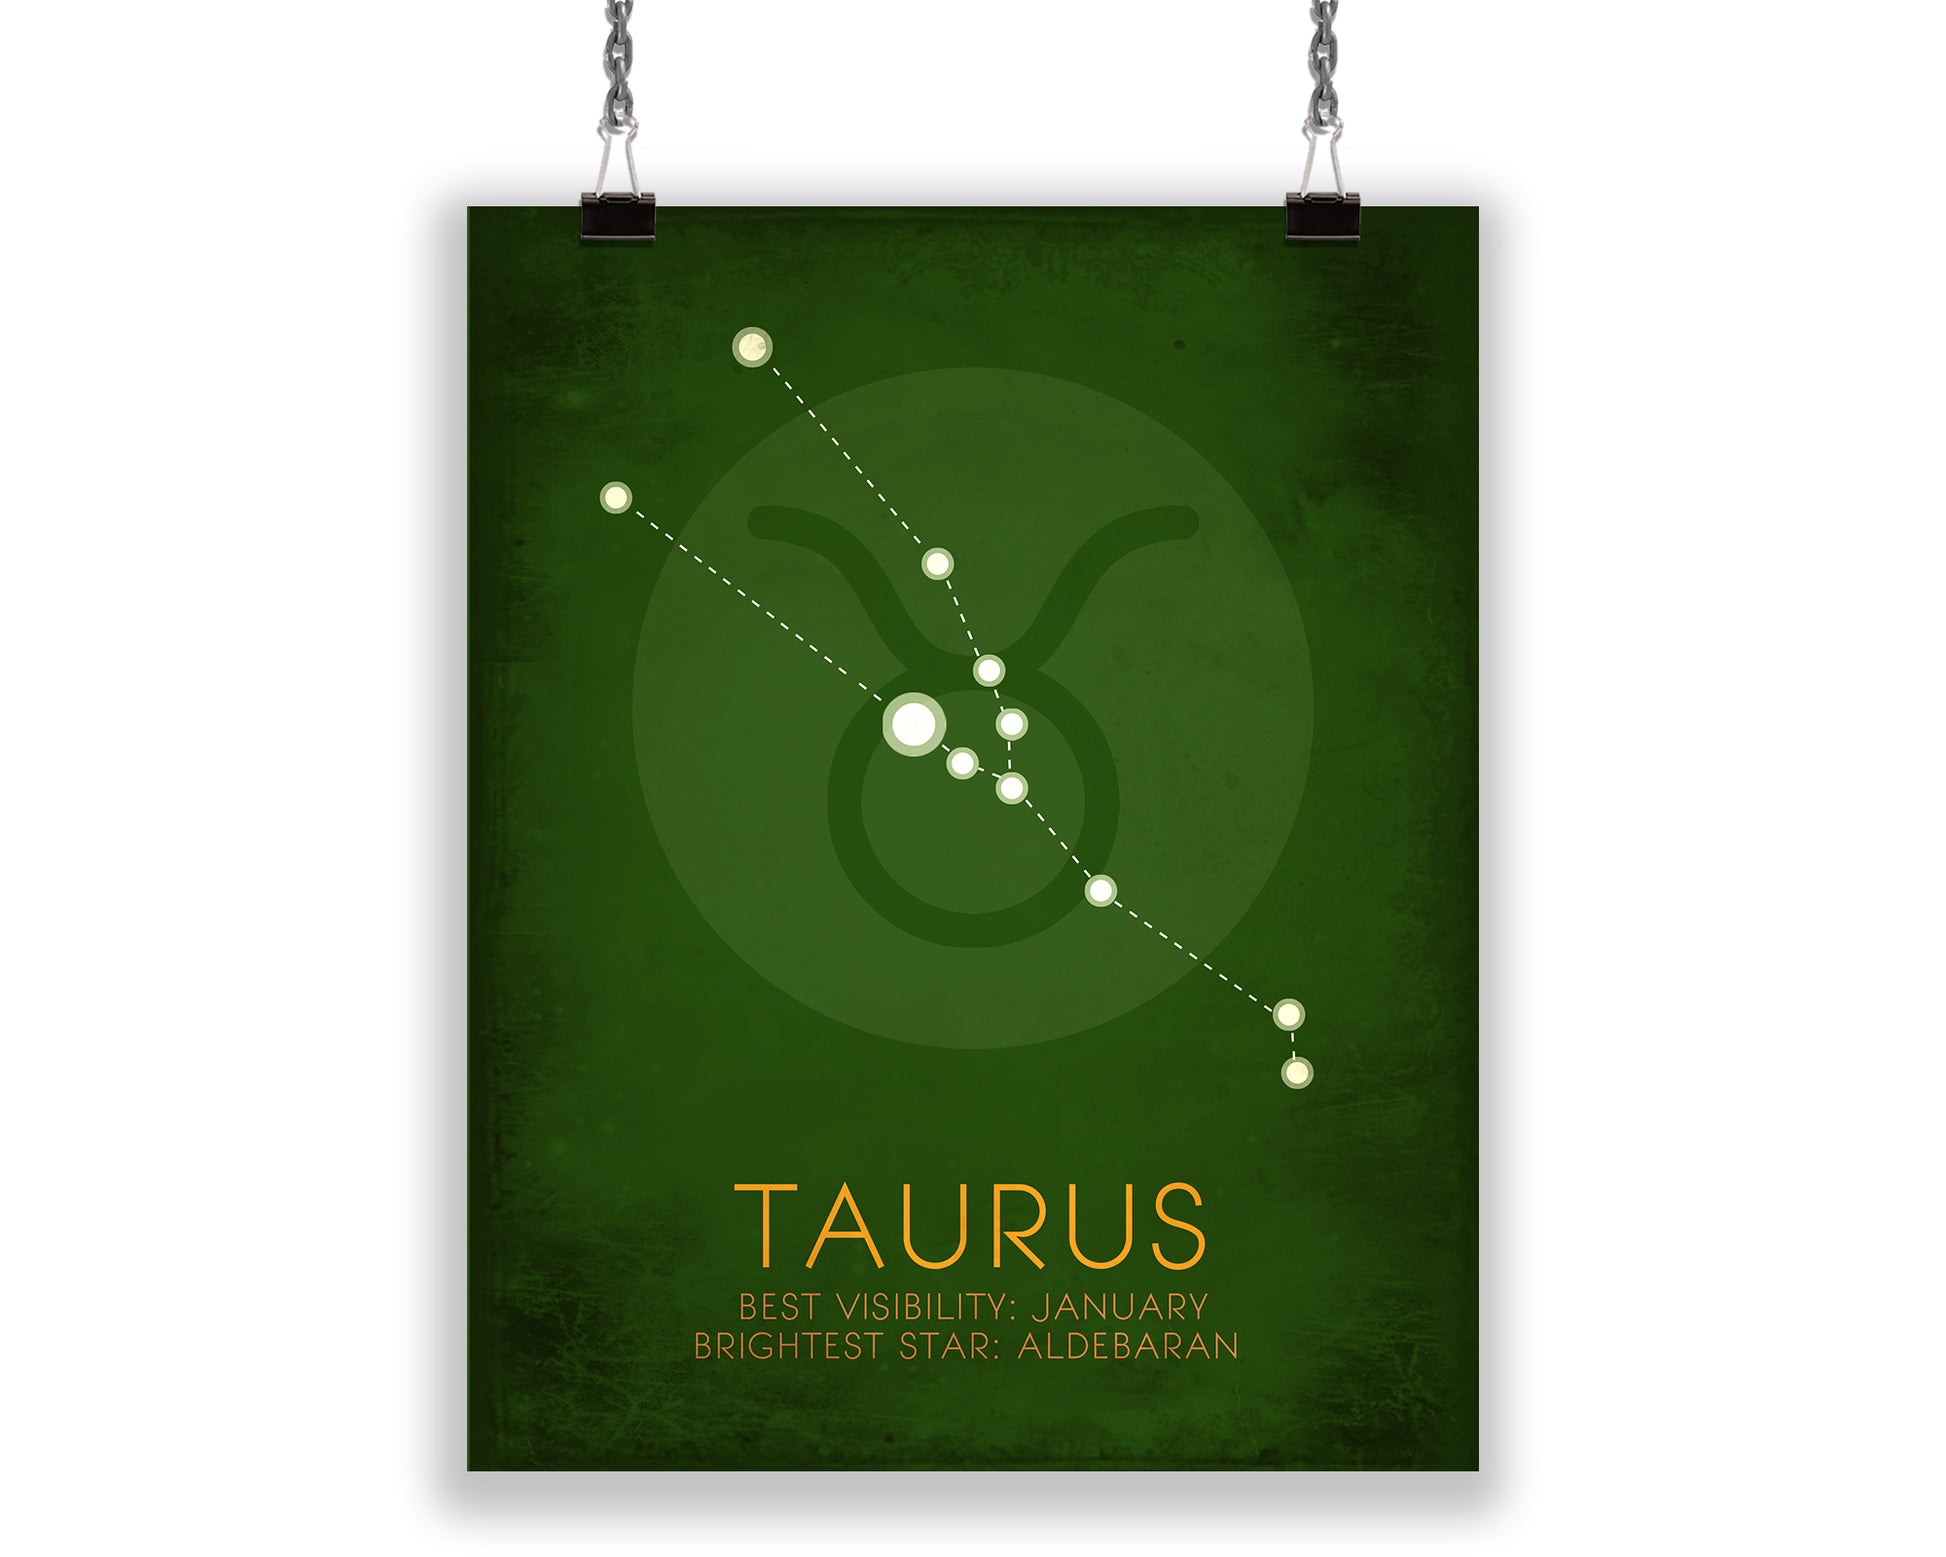 An art print showing the Taurus star constellation in a mossy green minimalist design, and lists the best month for optimal visibility and the brightest star. 